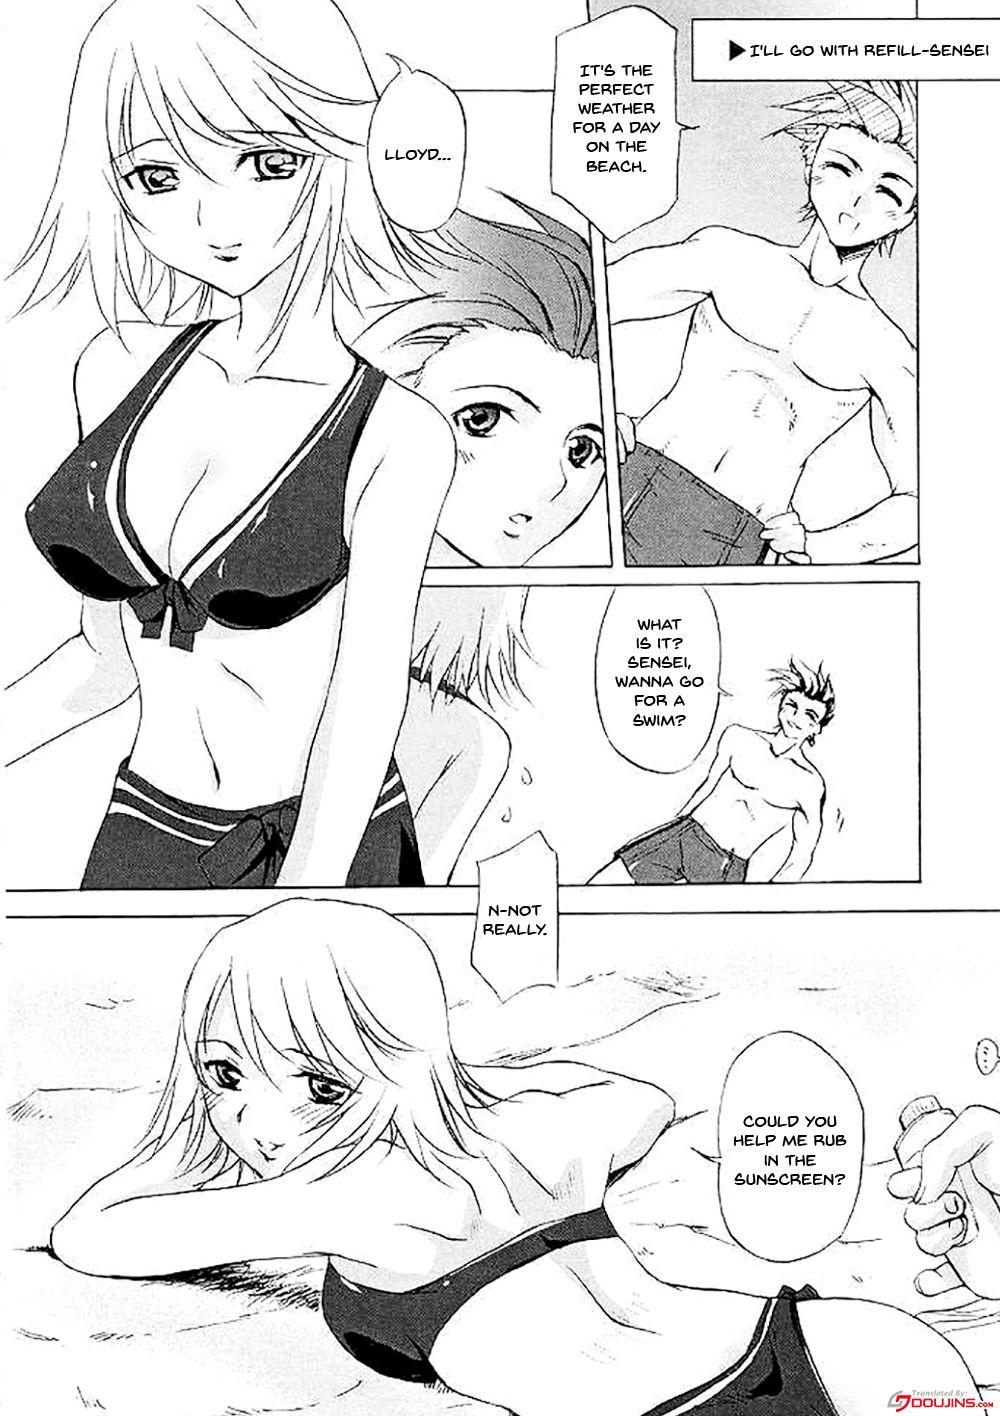 Skirt Tales of Seaside - Tales of symphonia Star - Page 3